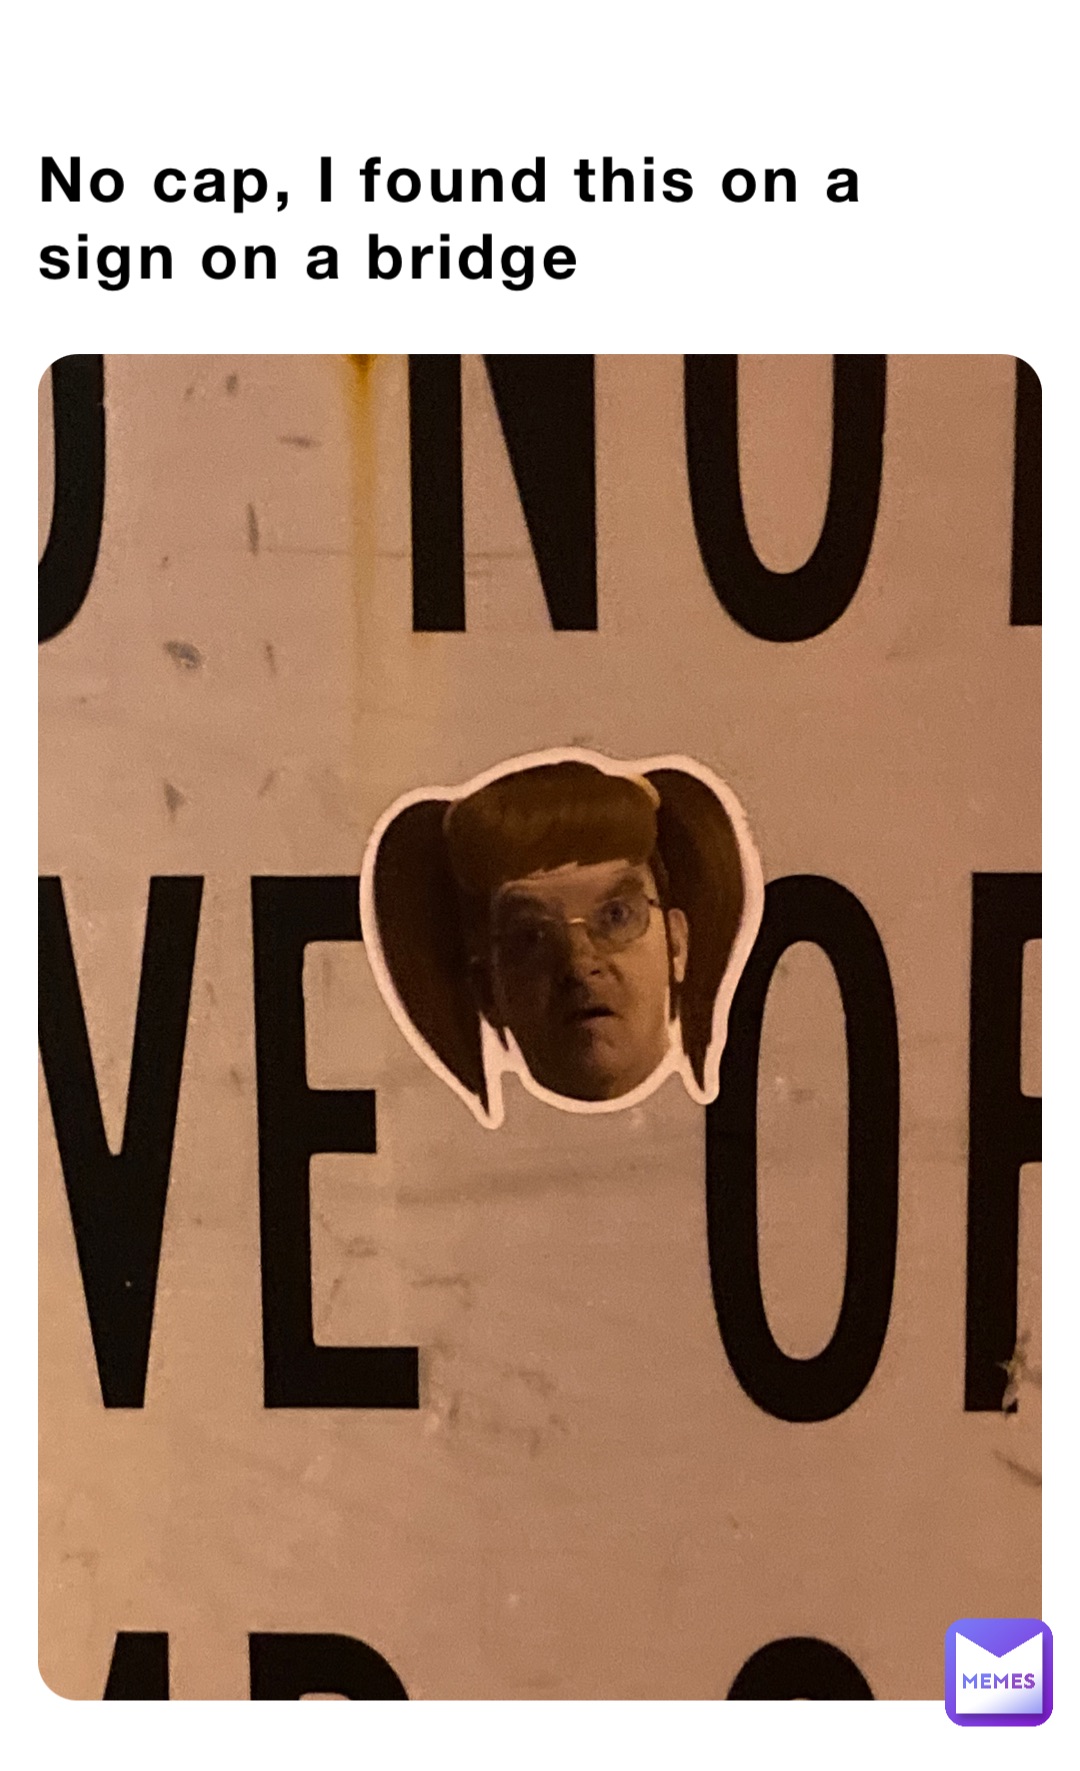 No cap, I found this on a sign on a bridge